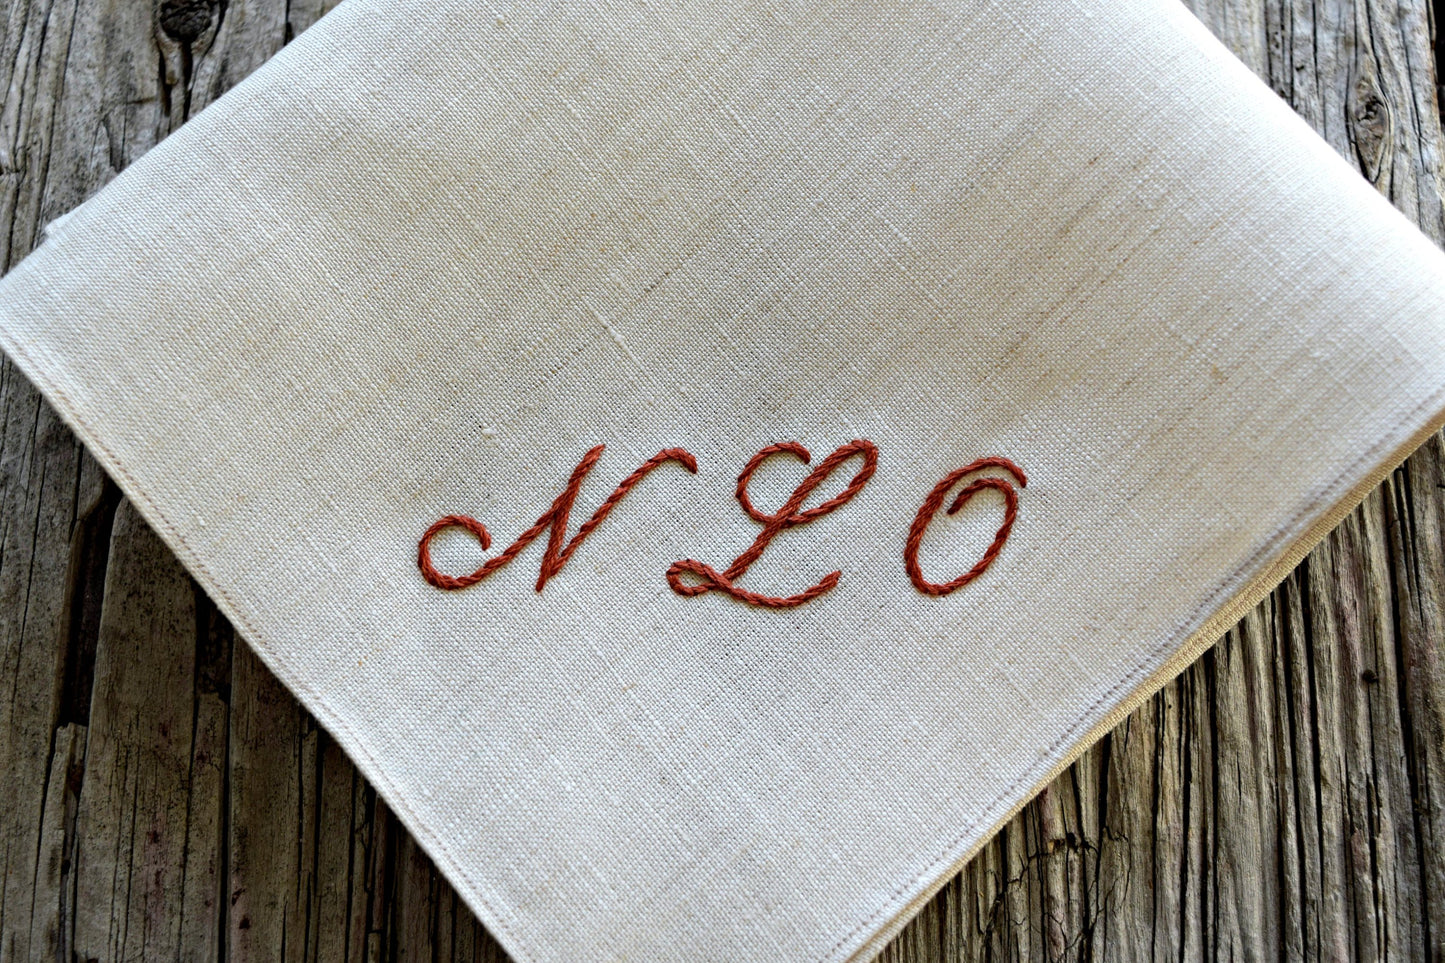 Oatmeal Irish Linen Handkerchief Monogrammed with Three Initials : Simple and Sweet